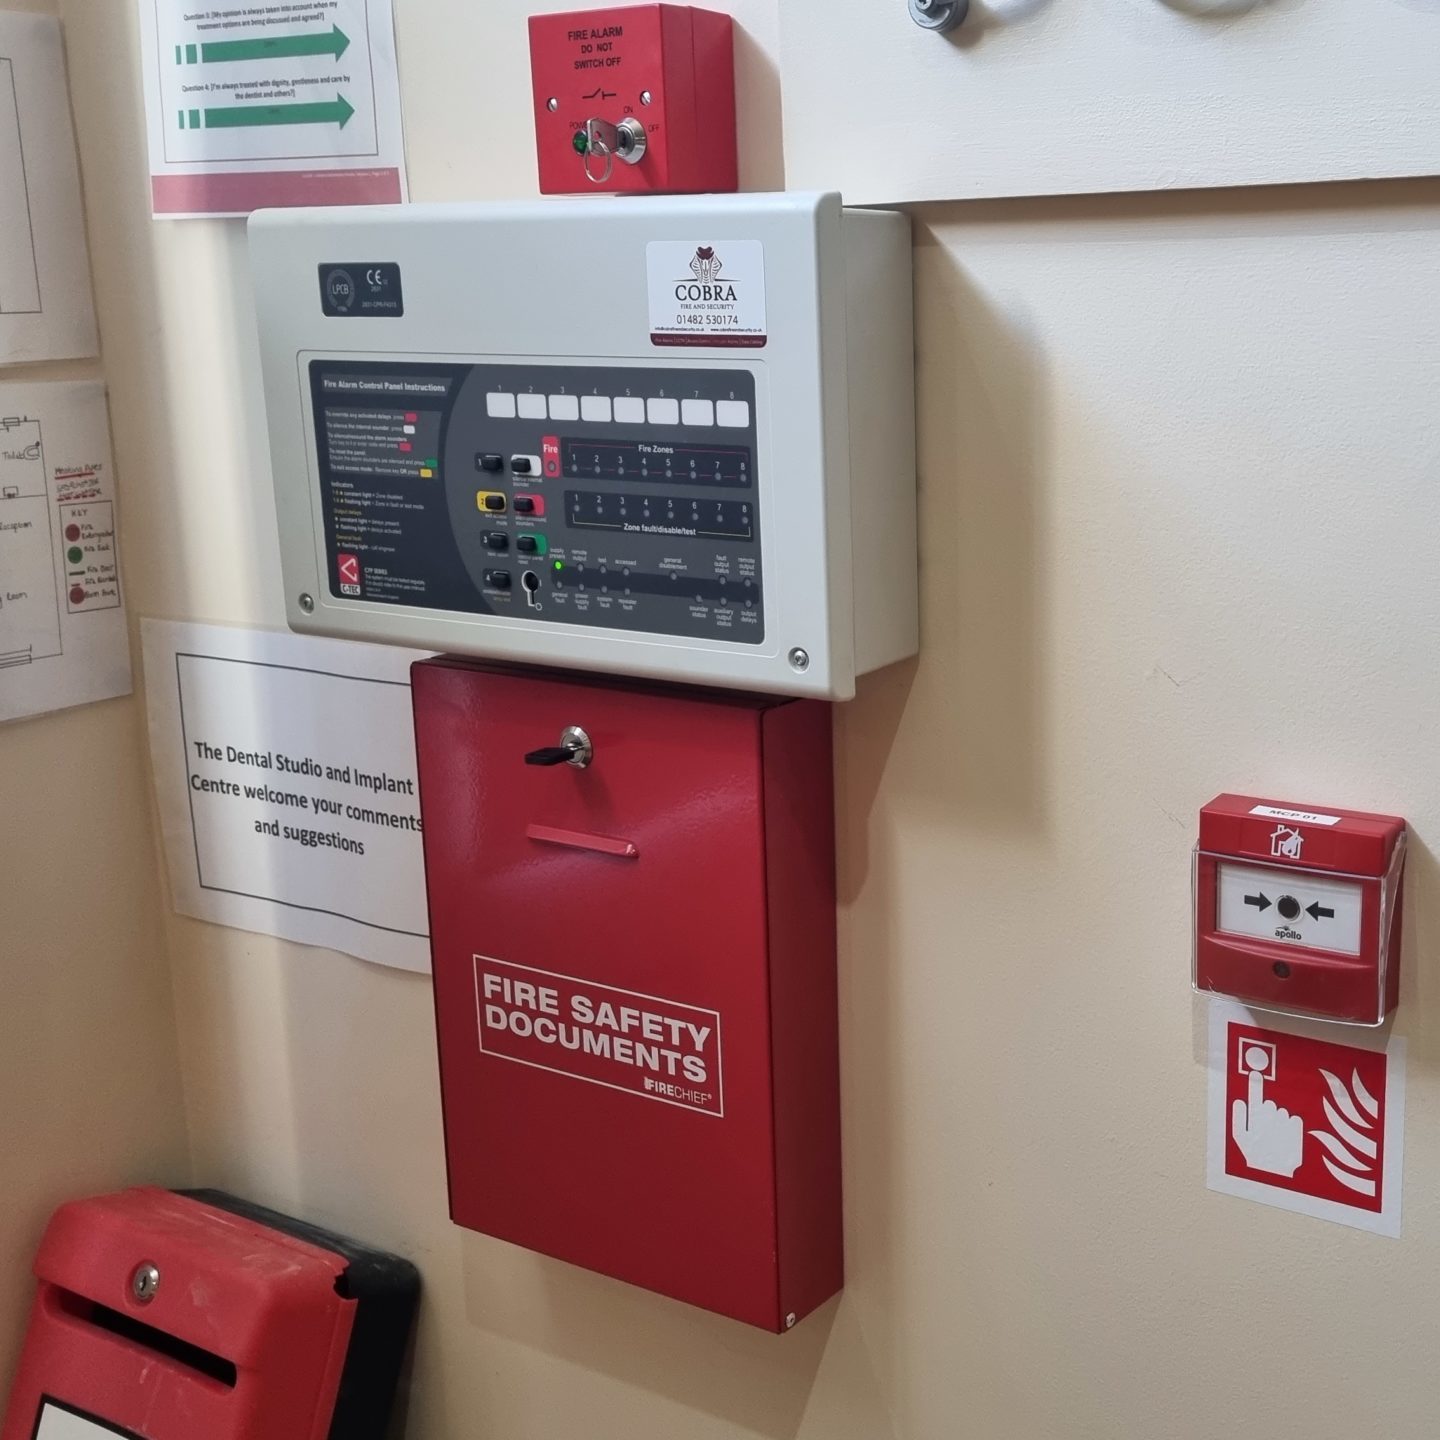 A fire Alarm mounted on a wall next to a fire alarm call point and documents box for fire alarm documents.